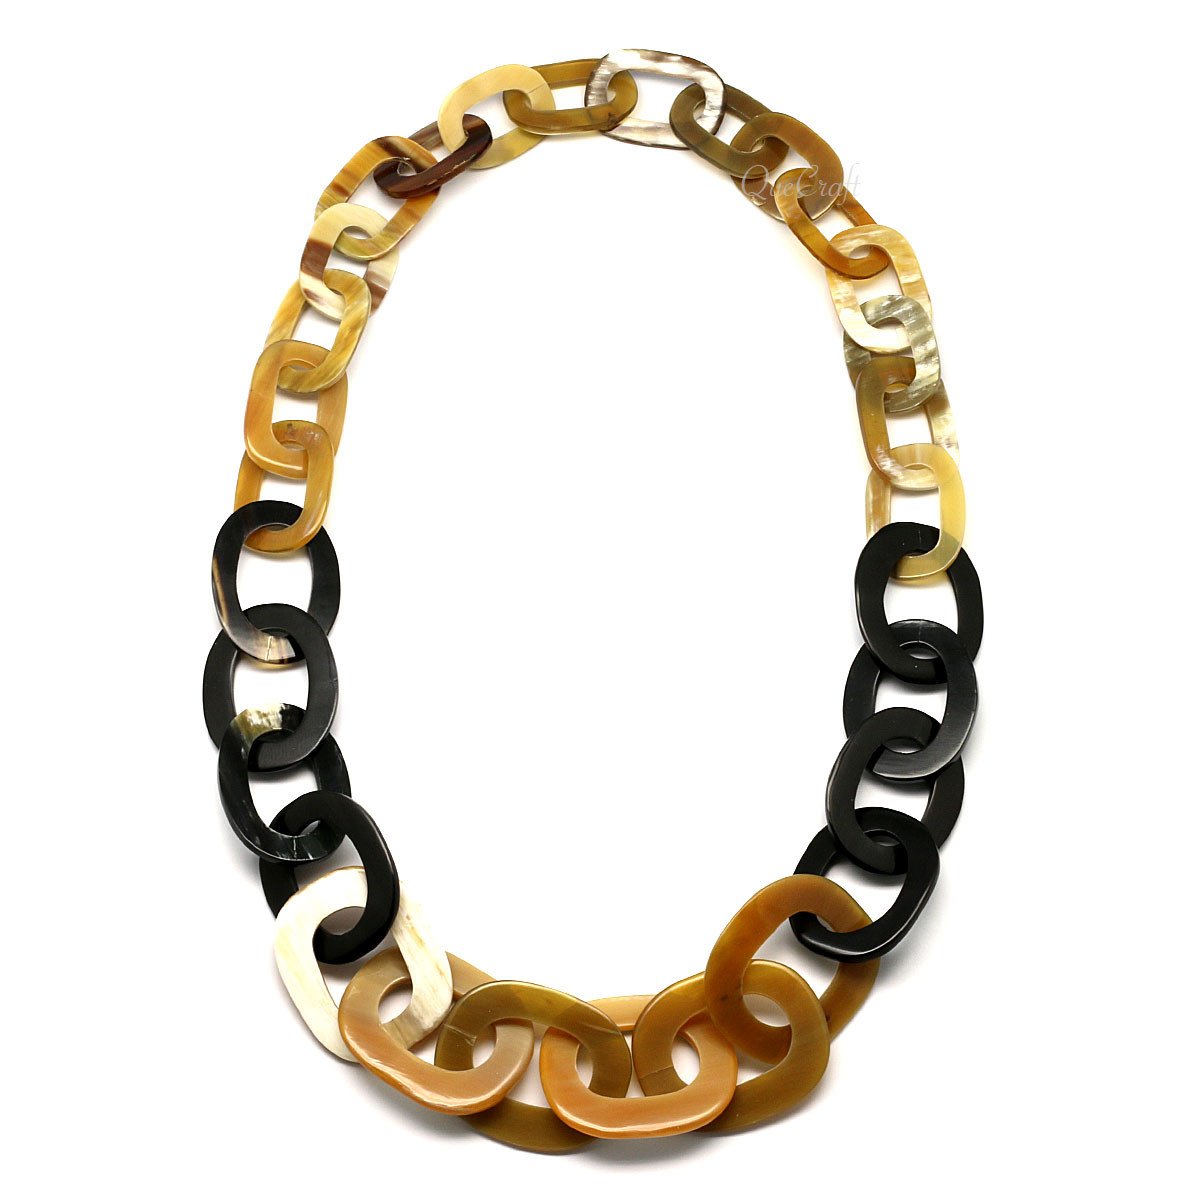 Horn Chain Necklace #5207 - HORN JEWELRY